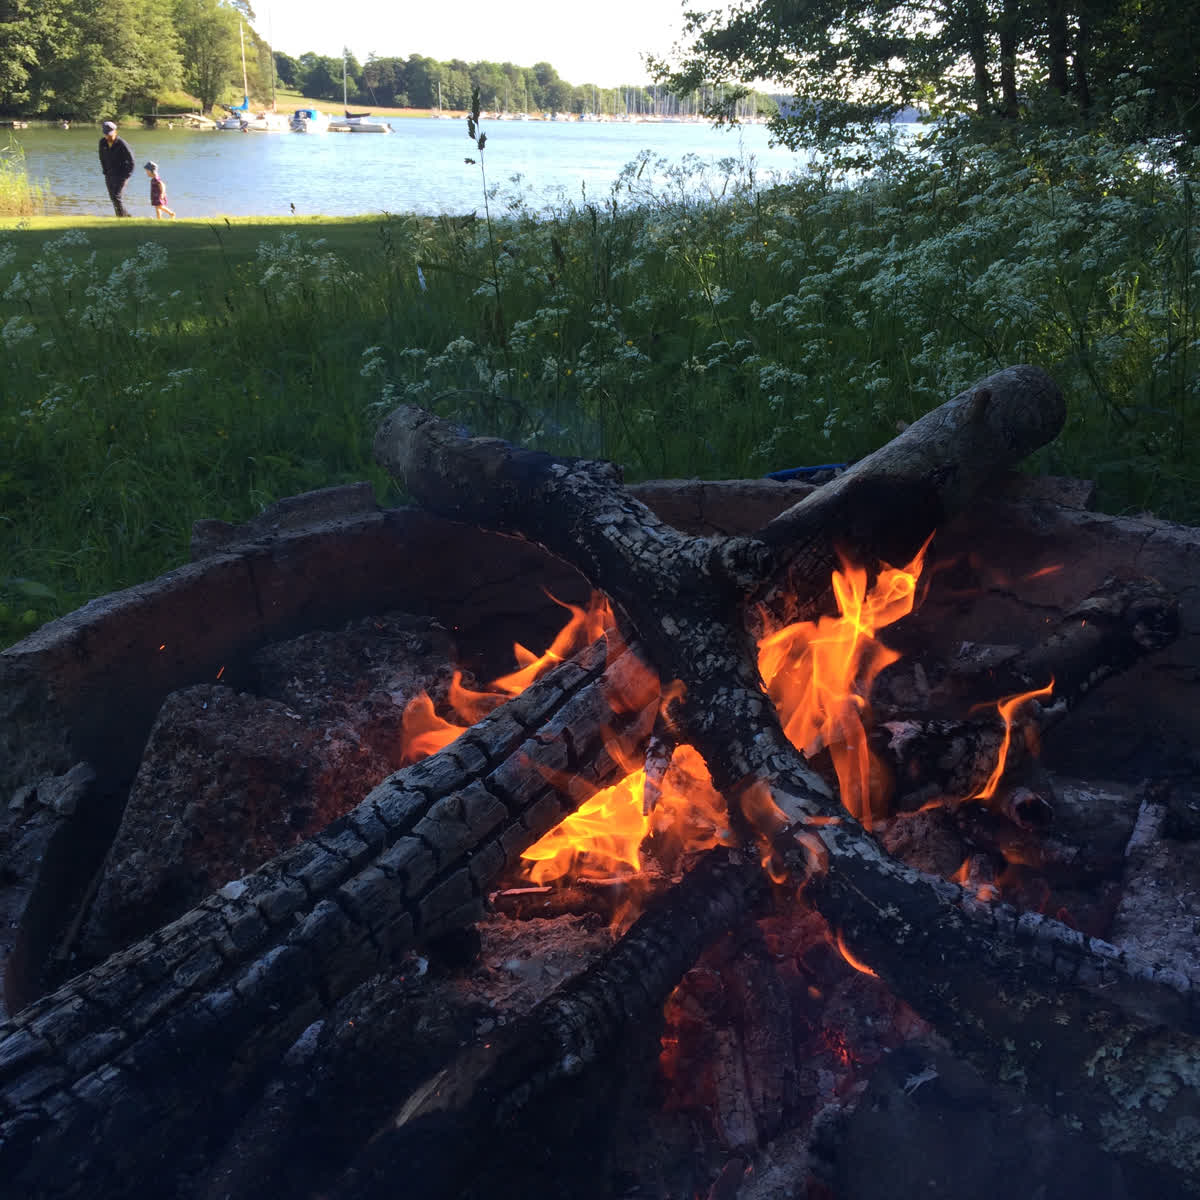 A campfire with a lake in the background.